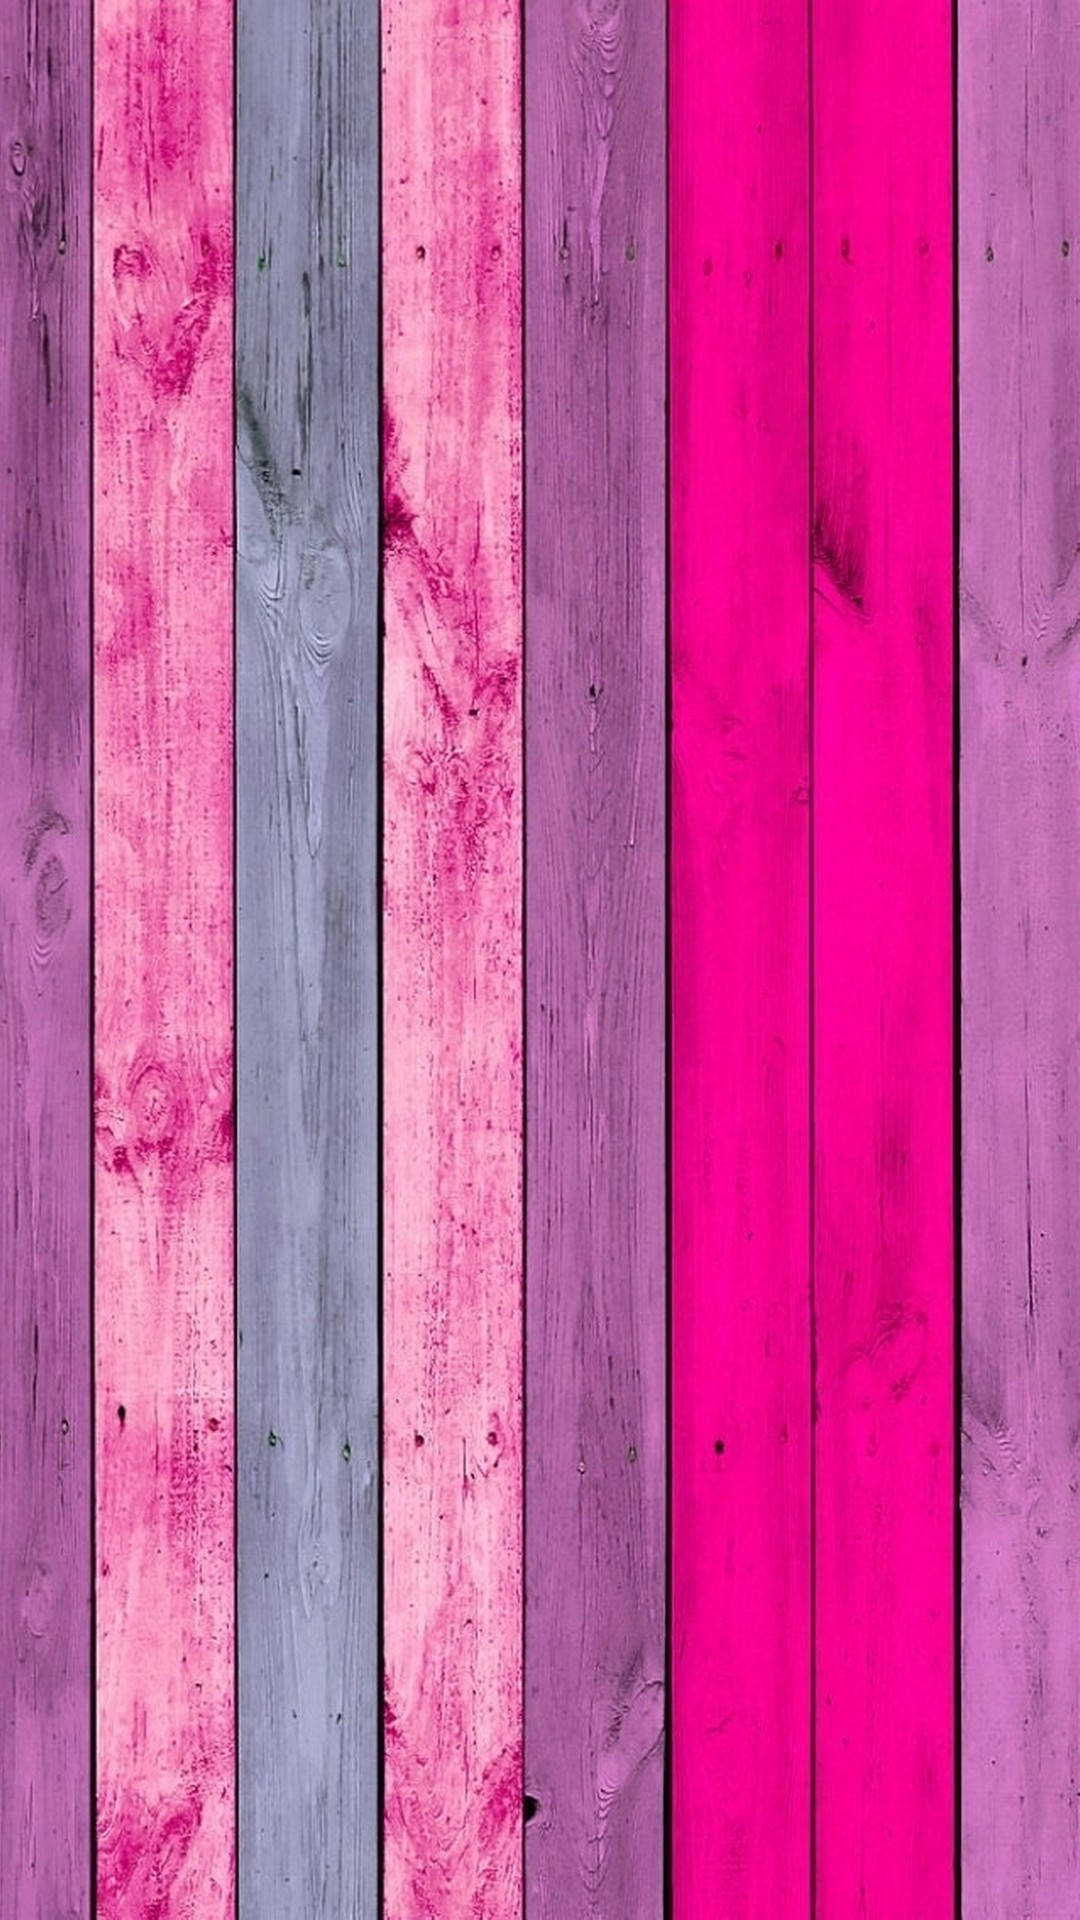 Pink Wooden Boards Girly Iphone Background